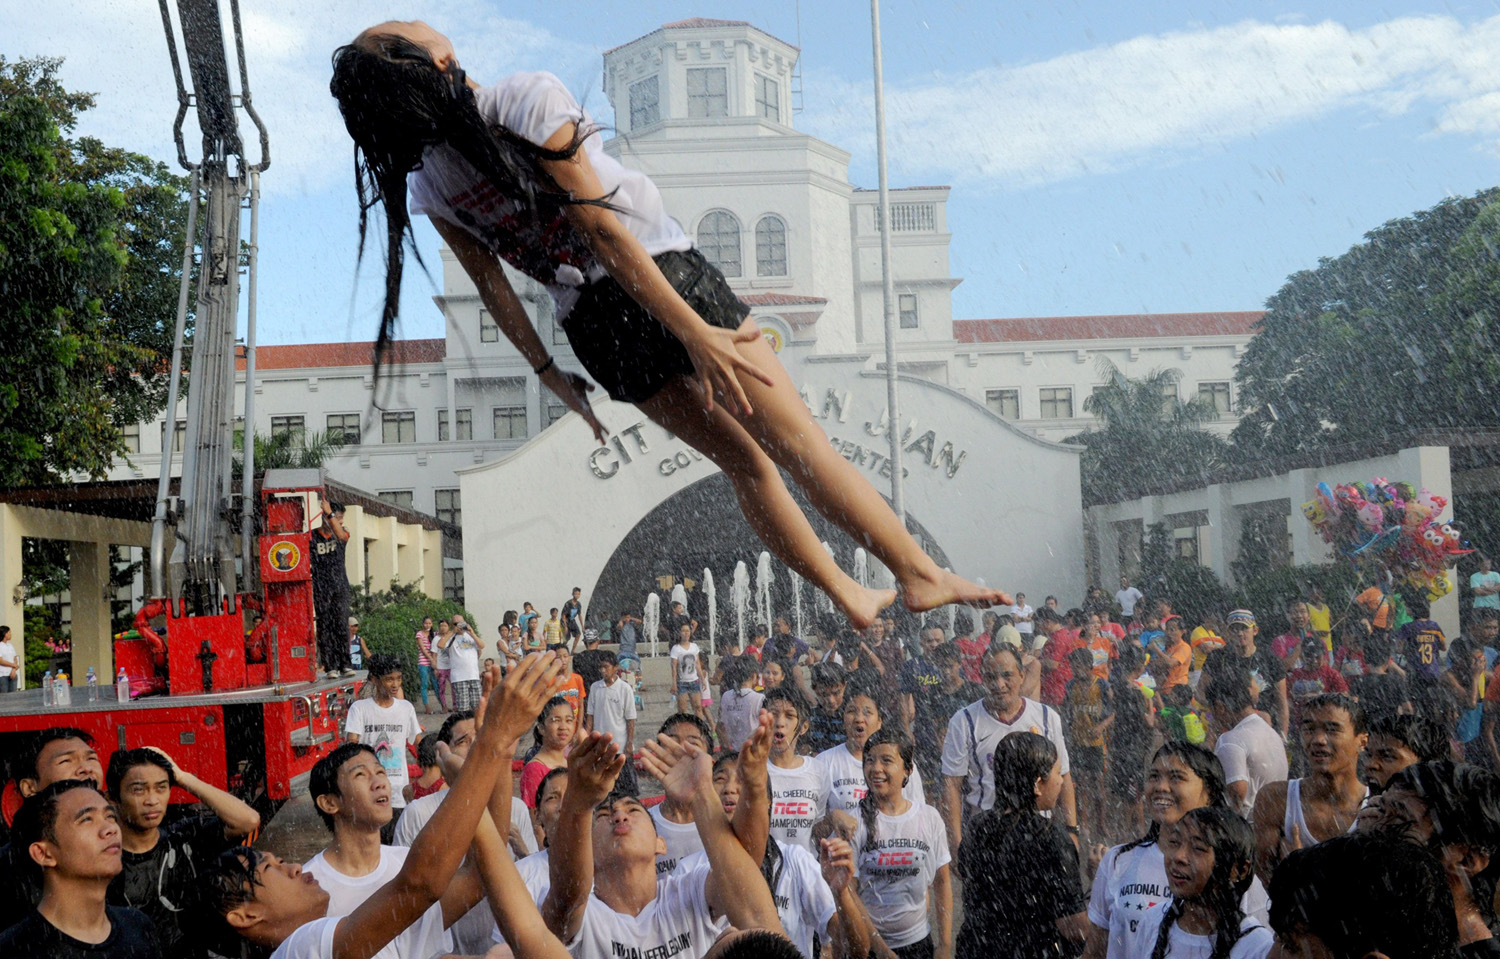 A woman is hoisted into the air by friends after they were sprayed with water as residents celebrate the feast day of St. John the Baptist in Manila on June 24, 2014.